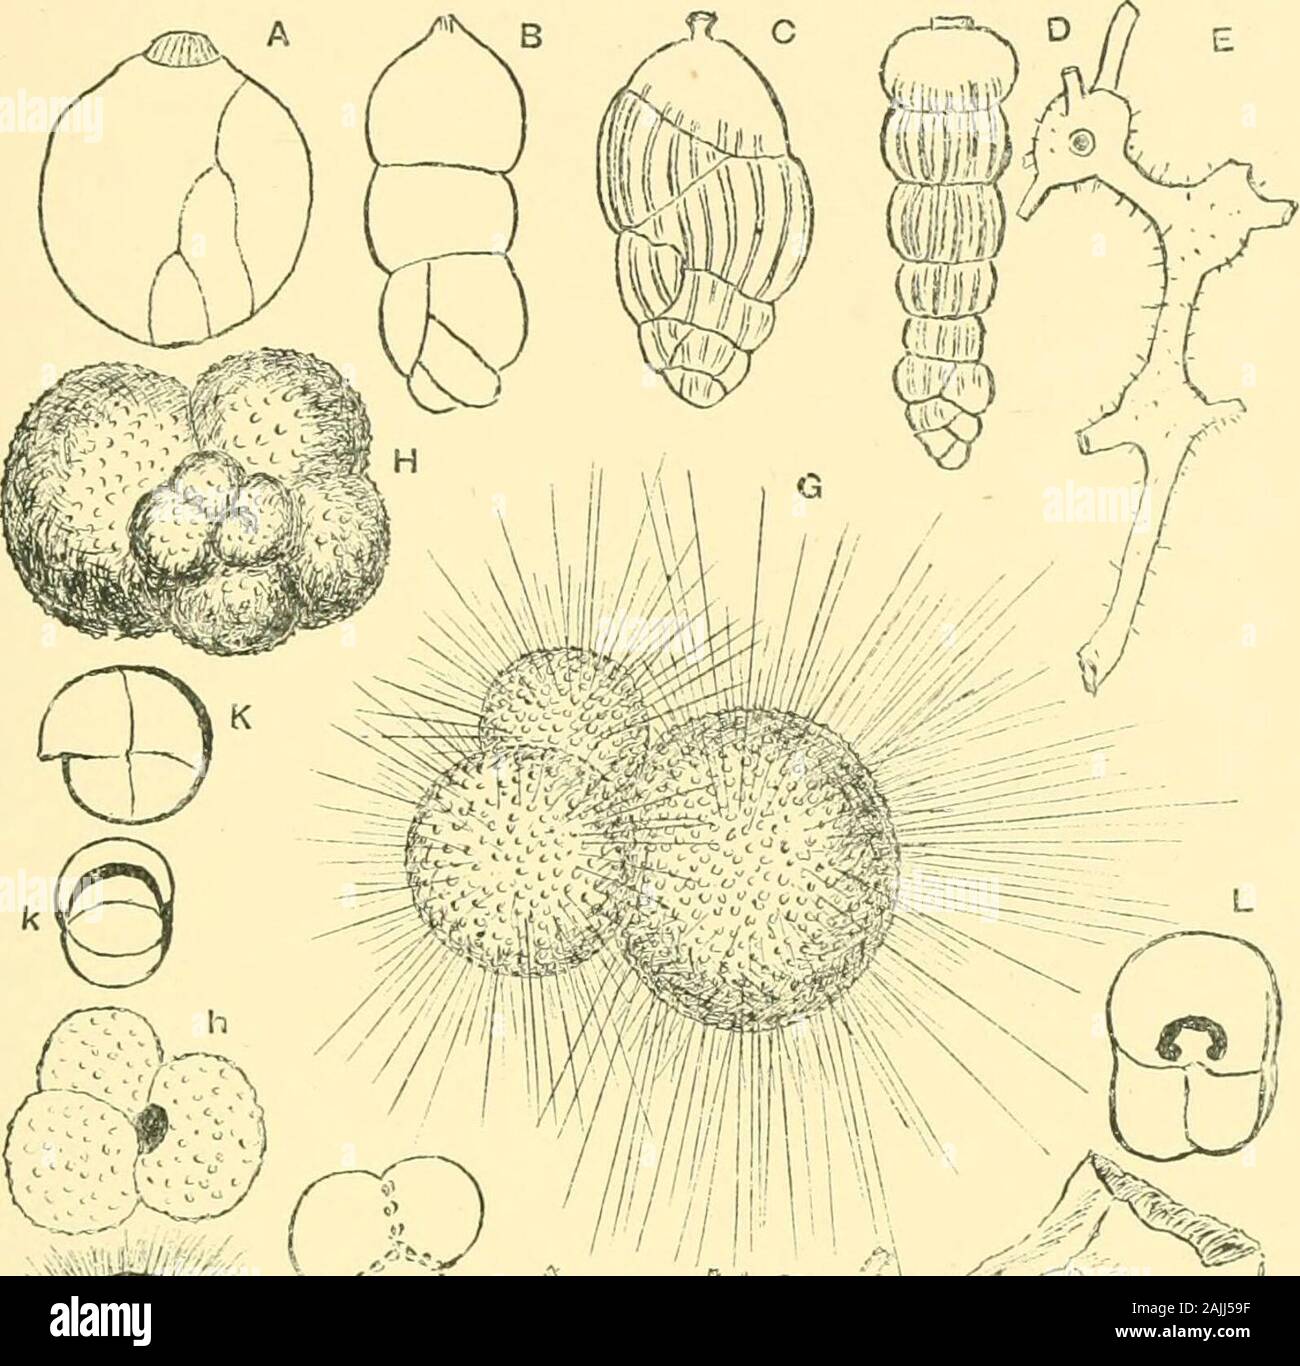 The foraminifera: an introduction to the study of the protozoa . been found in theS. Atlantic and in the N. and S. Pacific Oceans.At Funafuti, in the S. Pacific, it has lately been foundin dredgings from depths of 50 to 60 and 200 fathoms.(Plate 11, figs. M, 7;^.) 210 THE FORAMINIFEEA EXPLANATION OF PLATE 11. Fig. A. Polijmorijliina gihha, DOrbigny (after Goes), x .16. B. Dimorpliina tuberosa, DOrbigny. x 25. C. TJvigerina pygmcea, DOrbigny (after Goes), x 12. D. Sagraiiia striata, Schwager (after Brady). x 80. E. Bamuliiia globulifera, Brady, x 35. F. Vitriwebbiva la-vis, Sollas sp. x 17. G. Stock Photo